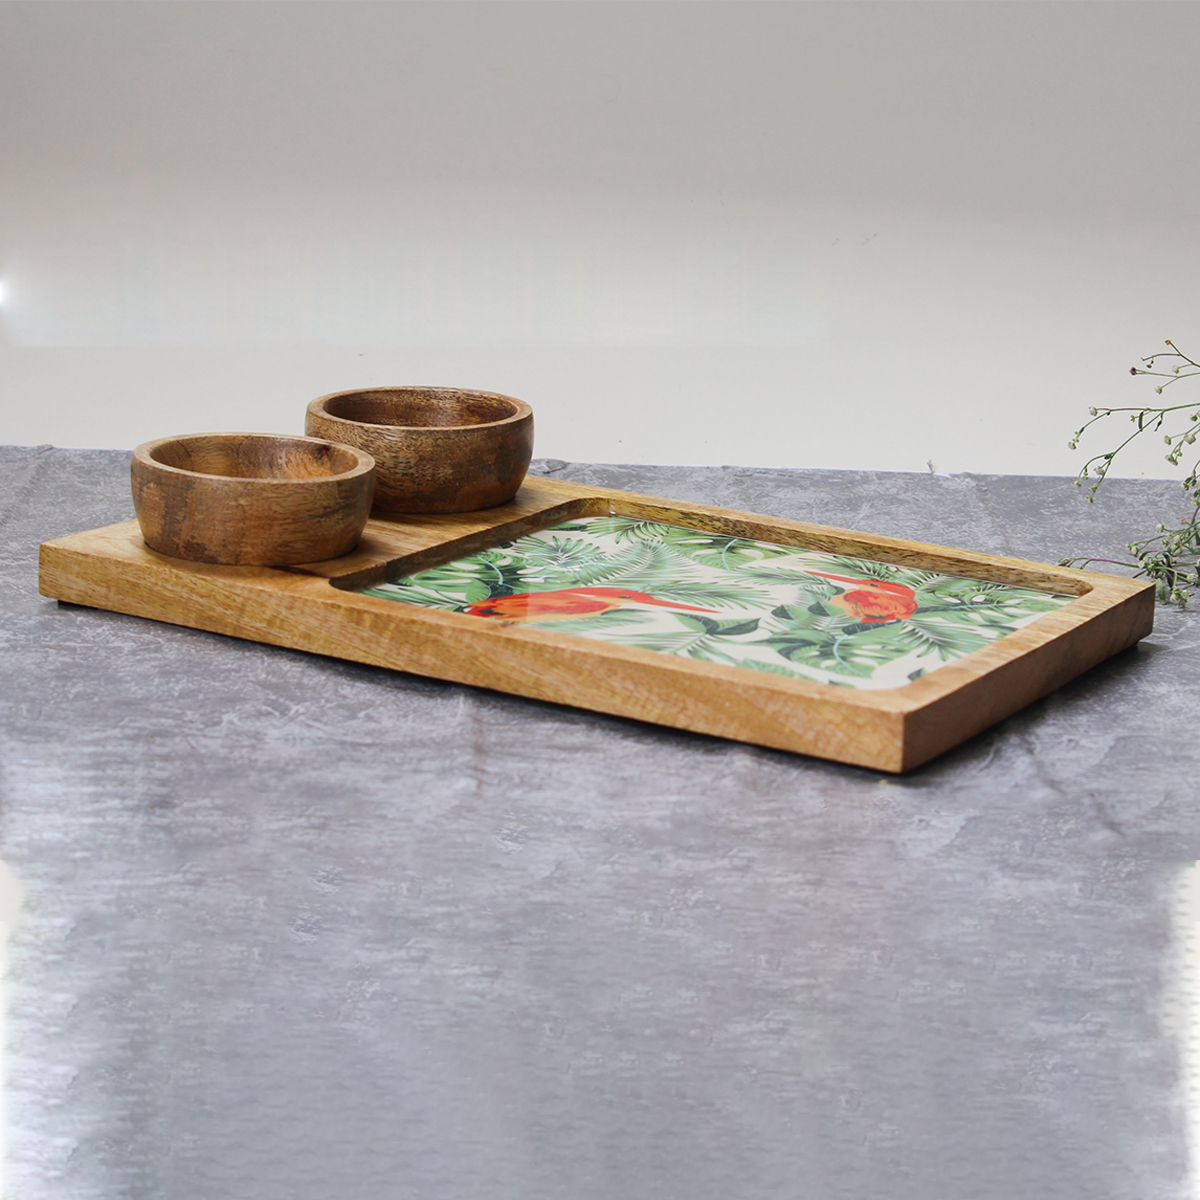 Vibrant By Nature Mangowood Platter with 2 Bowls